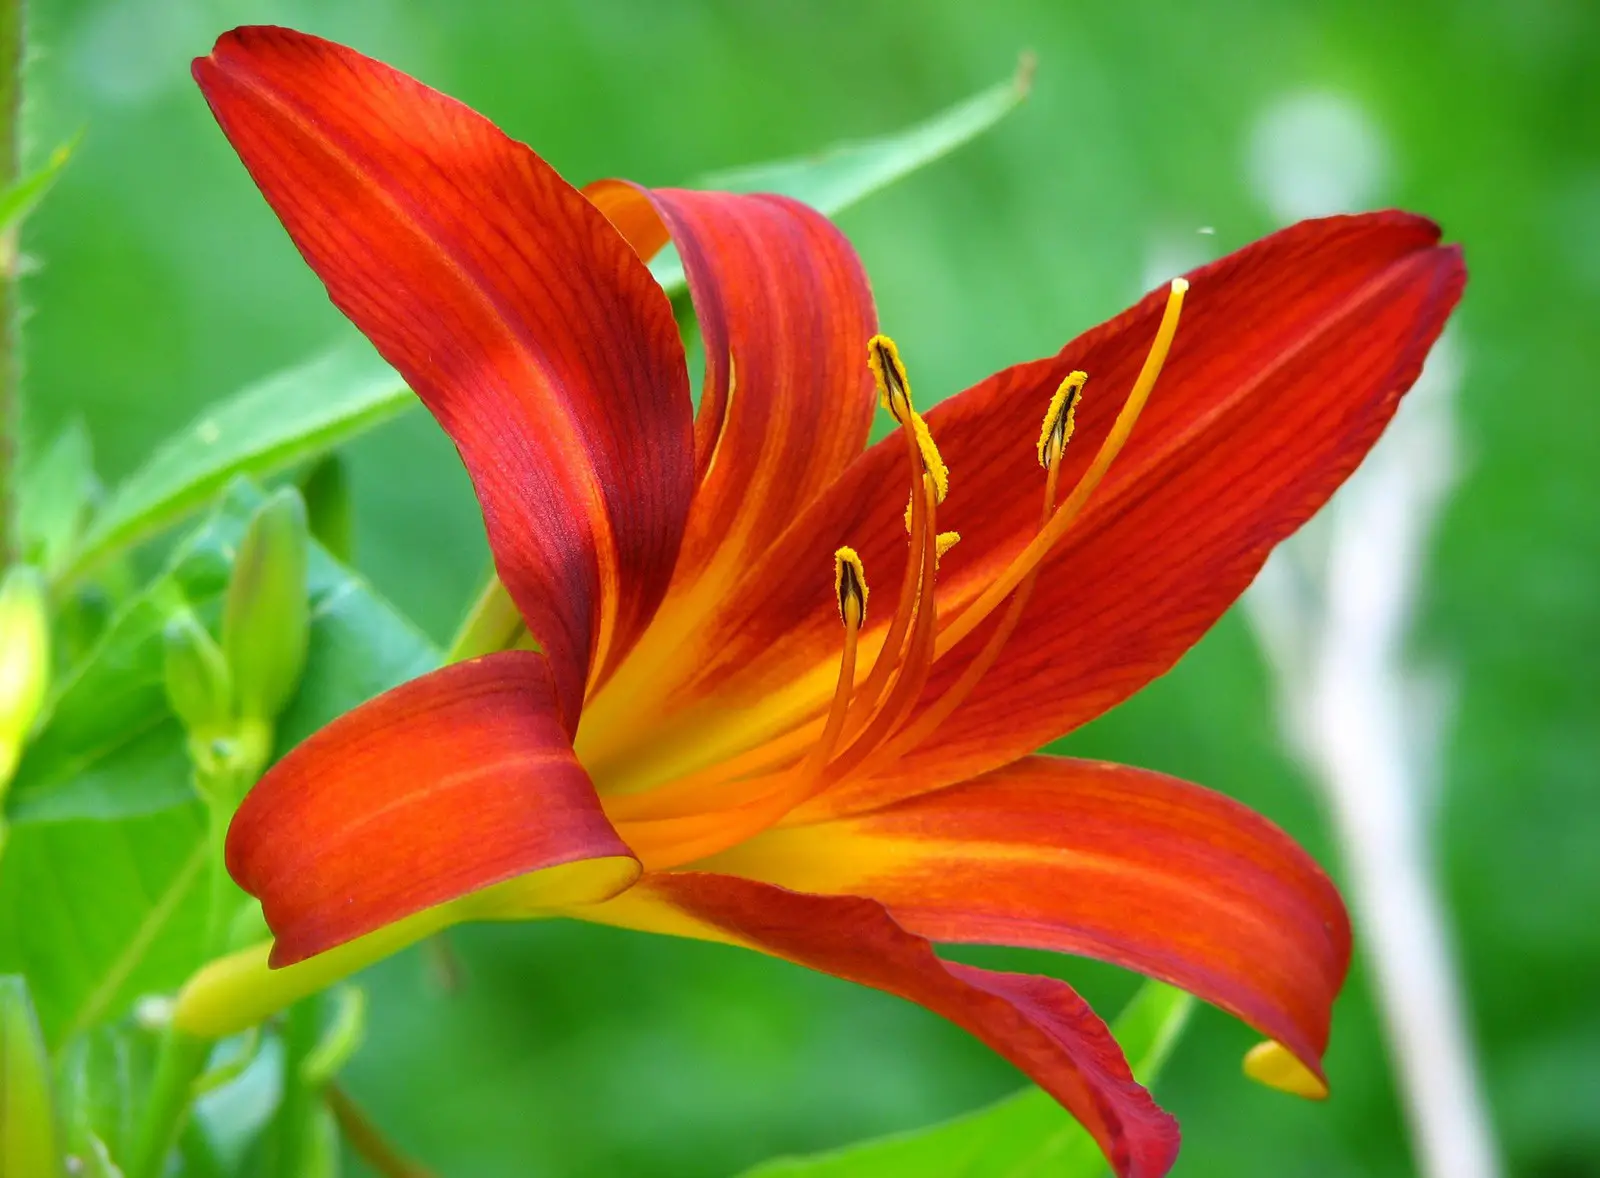 Other Meanings Of The Lily